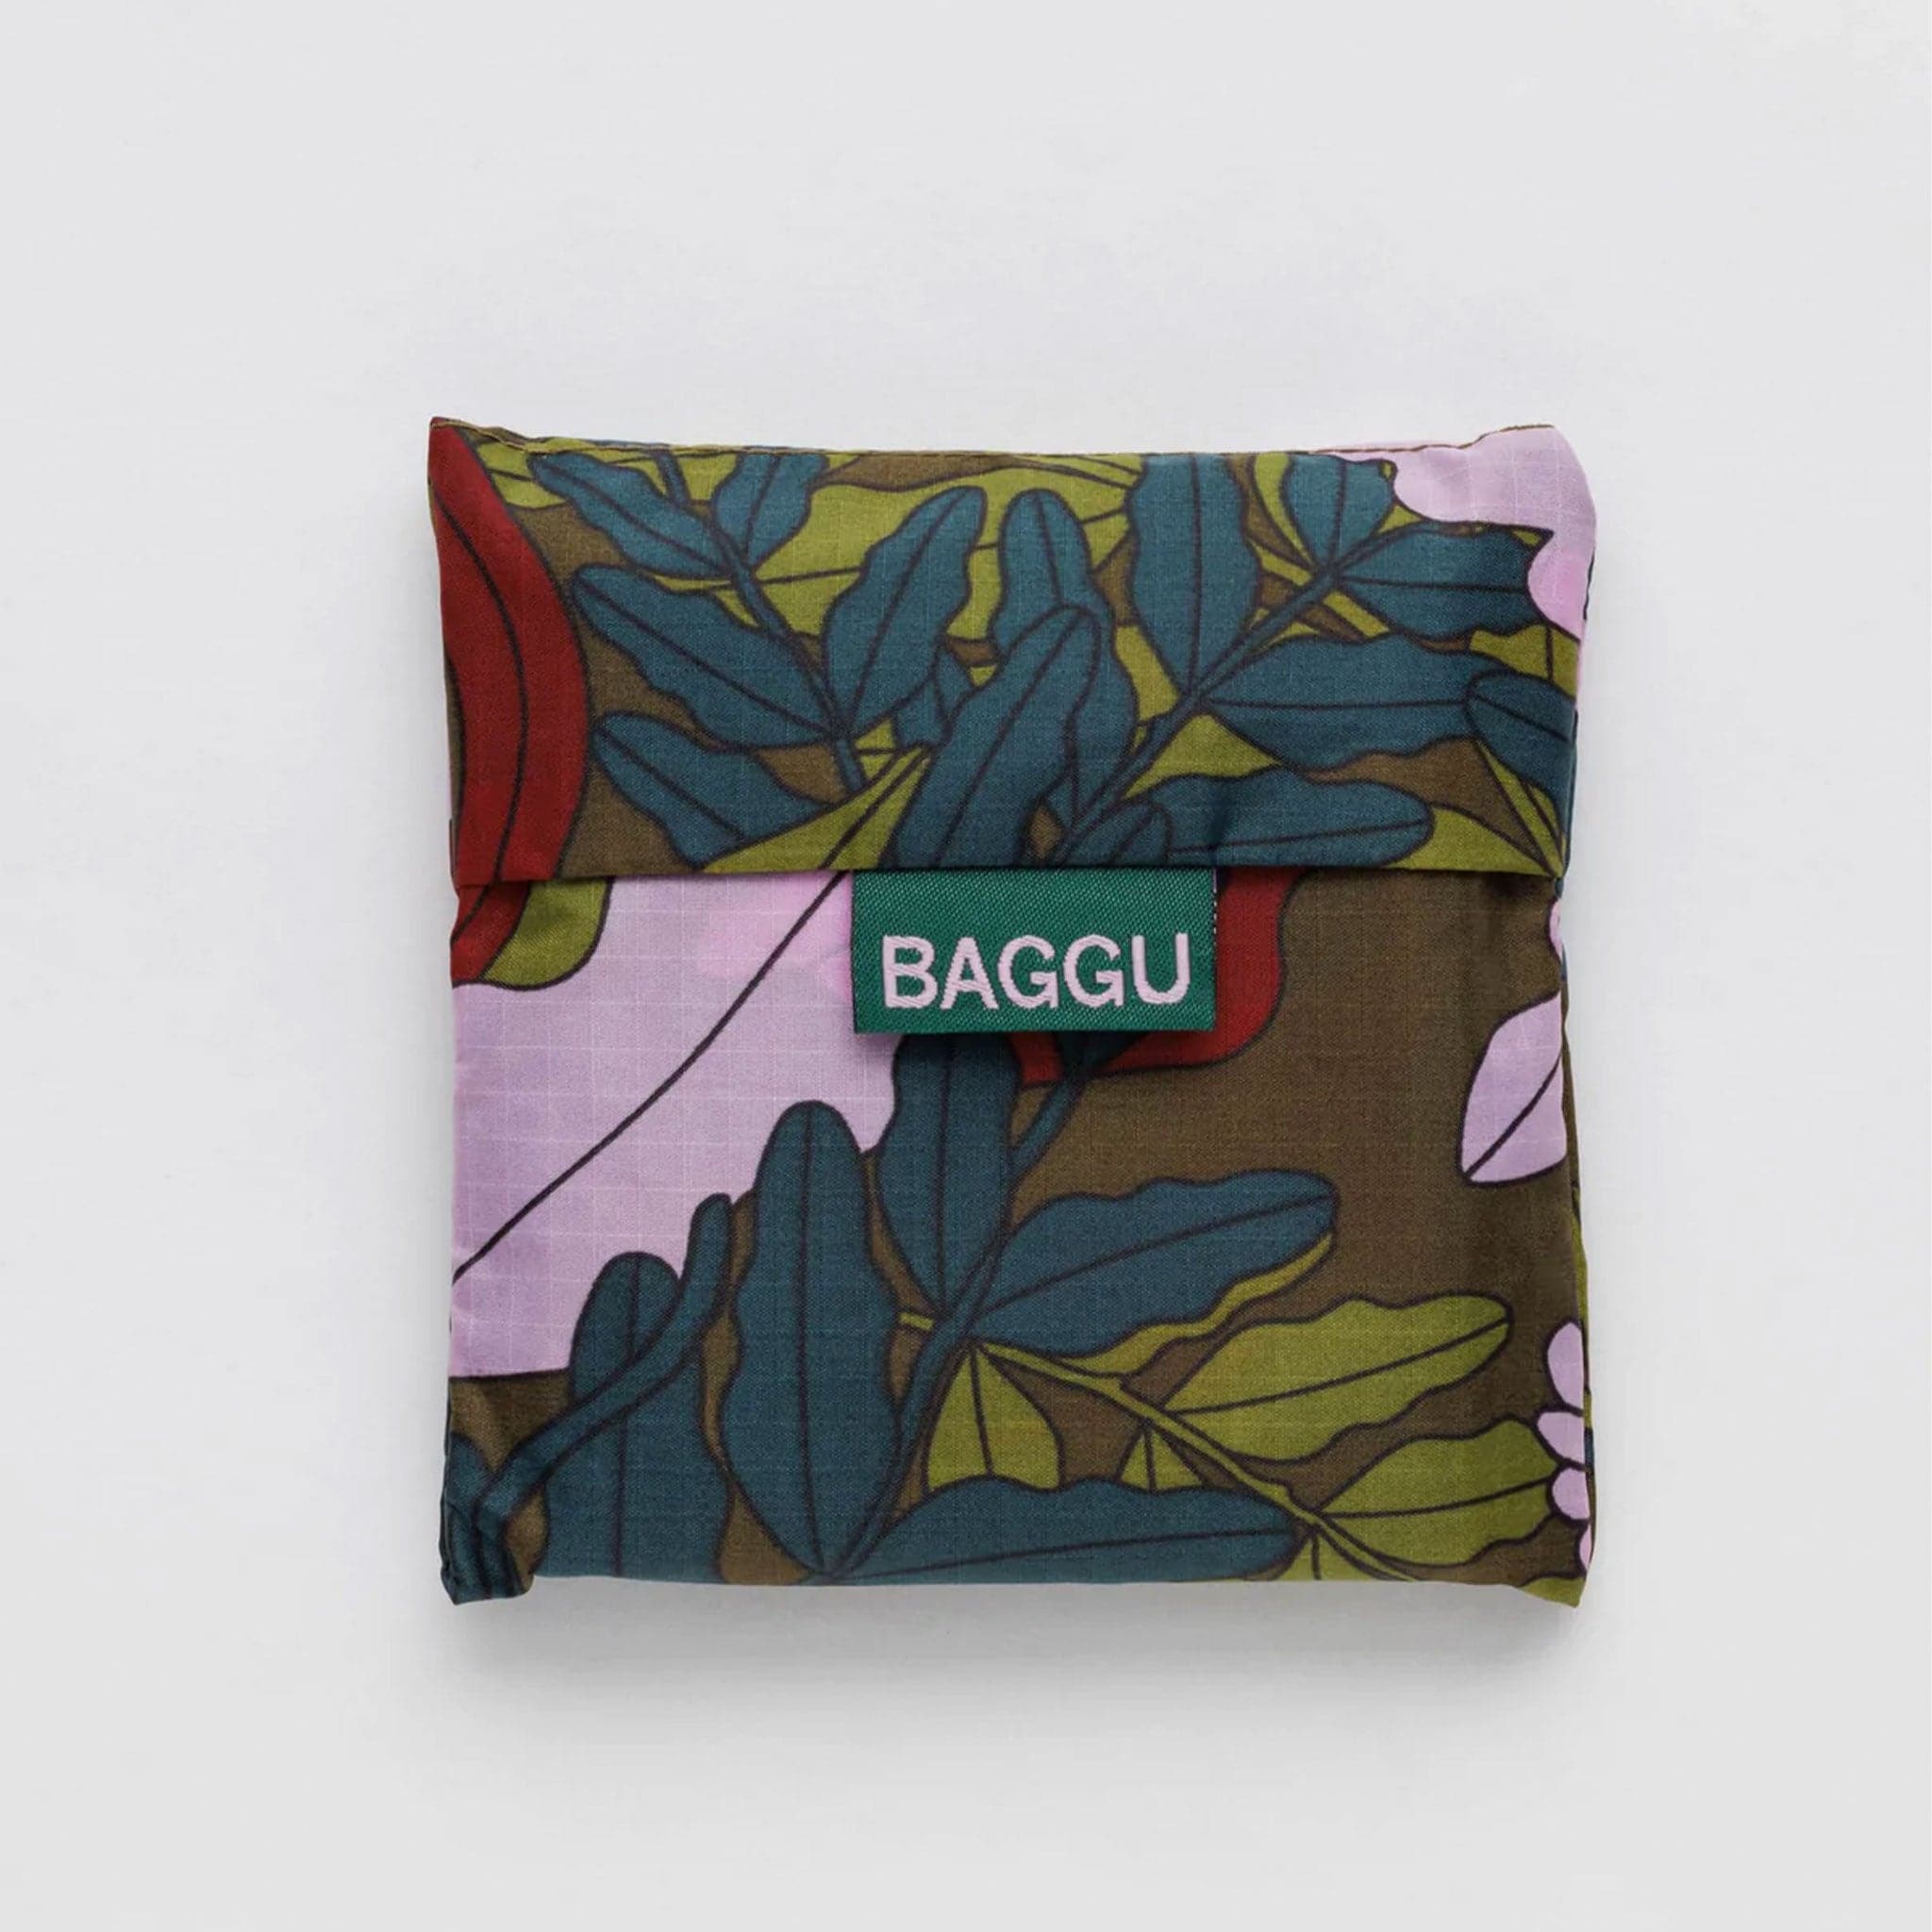 A dark green bag with leaves and flowers that range from lavender tones to dark reds and greens.